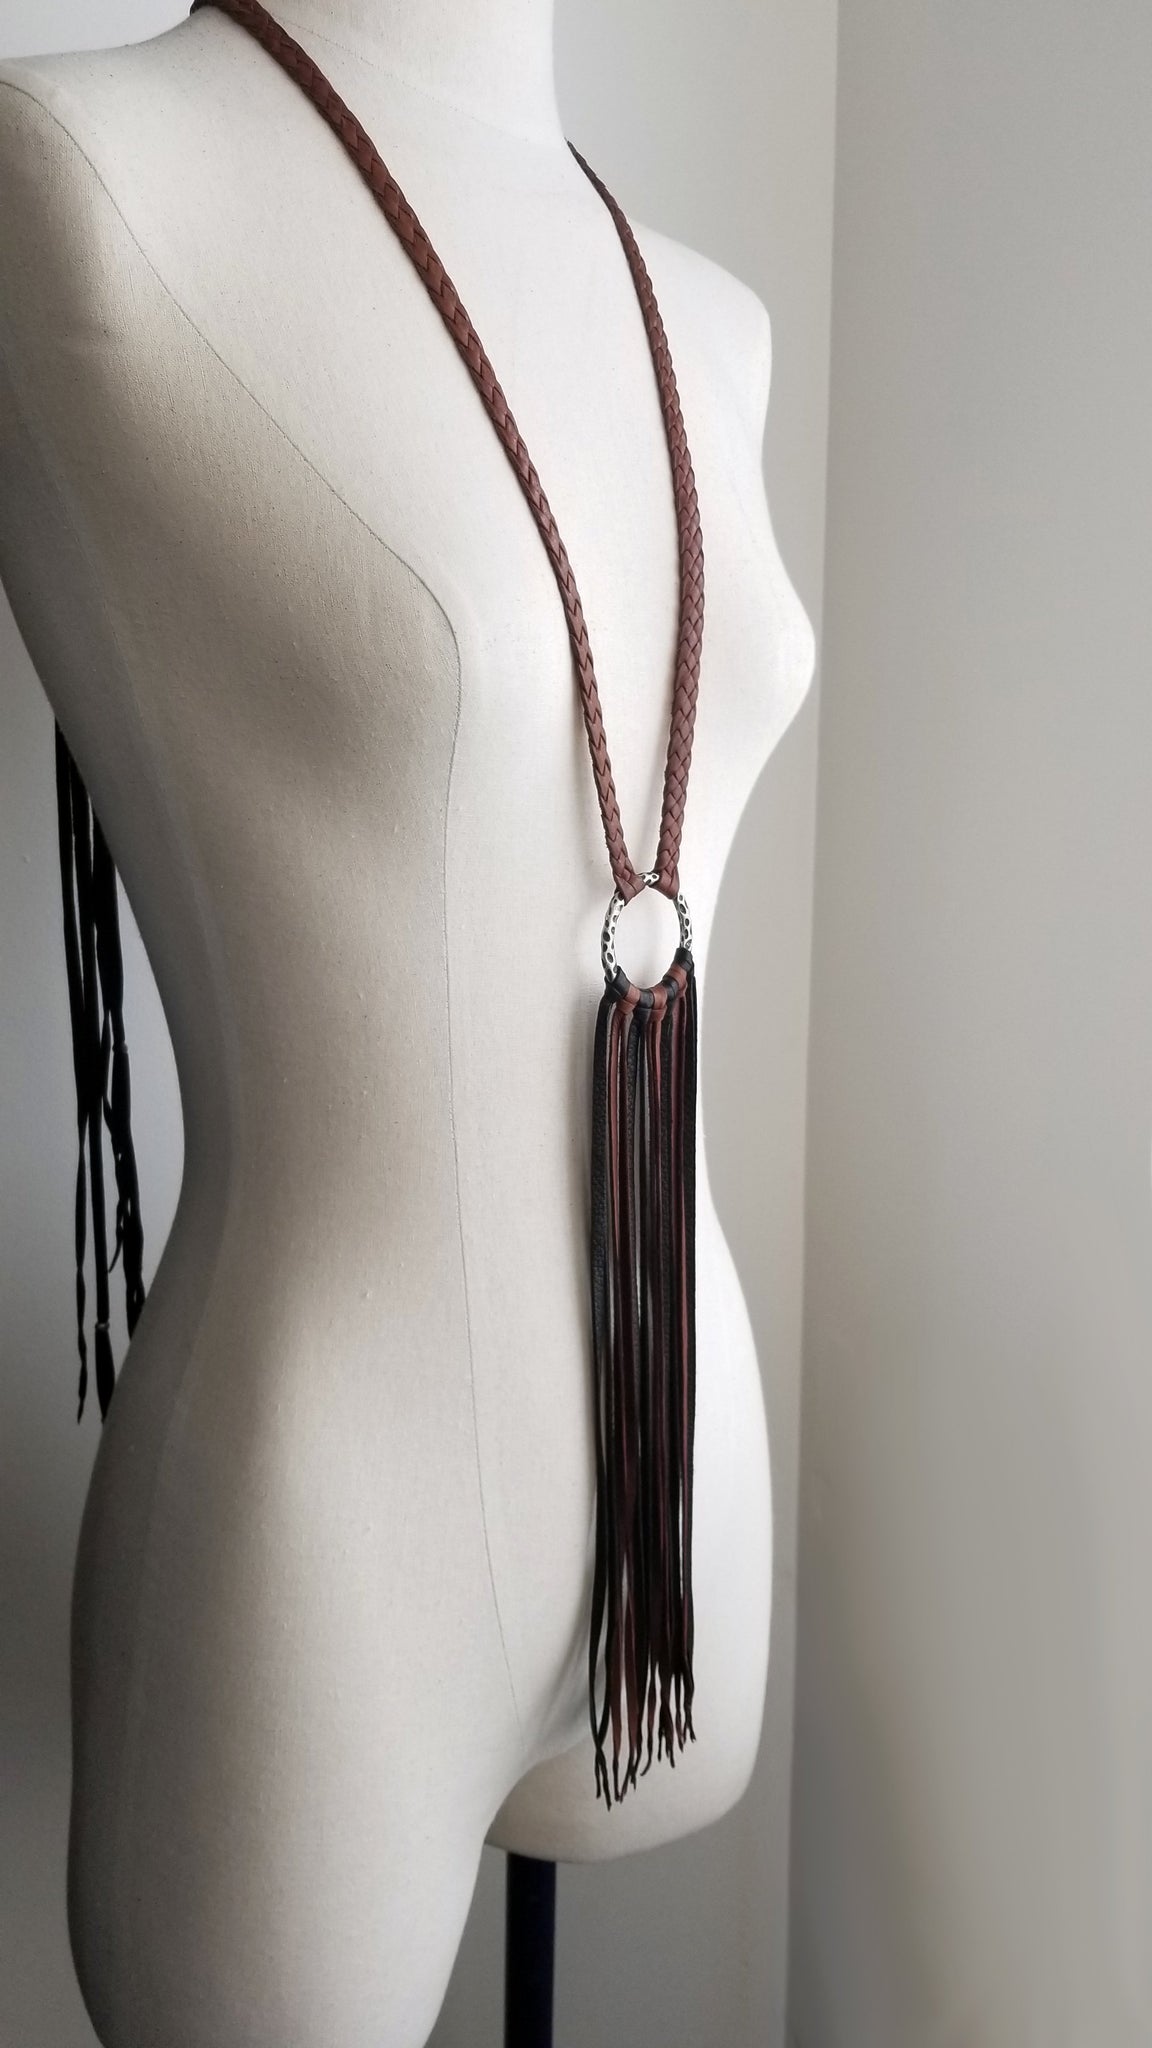 Aisha leather statement necklace - mahogany and black deerskin leather